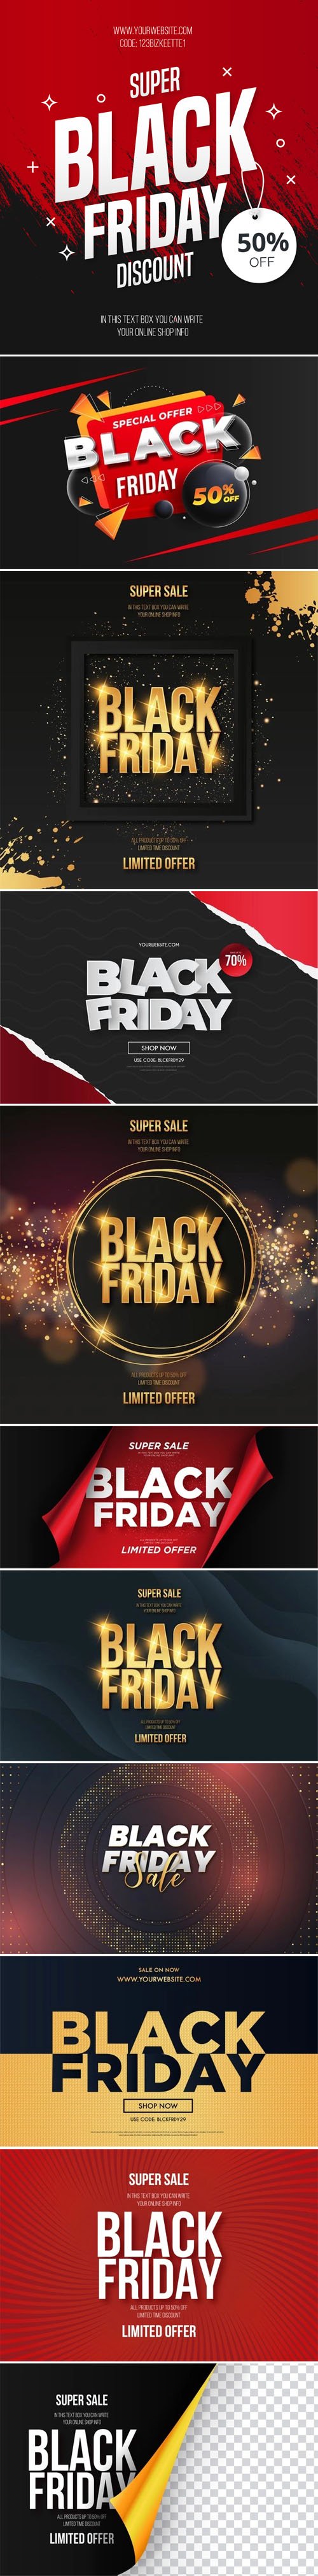 A4yMz6xOqhPLzSd9rTc5qtso1gieRQUX Black Friday Sale Backgrounds Vector Design Collection3